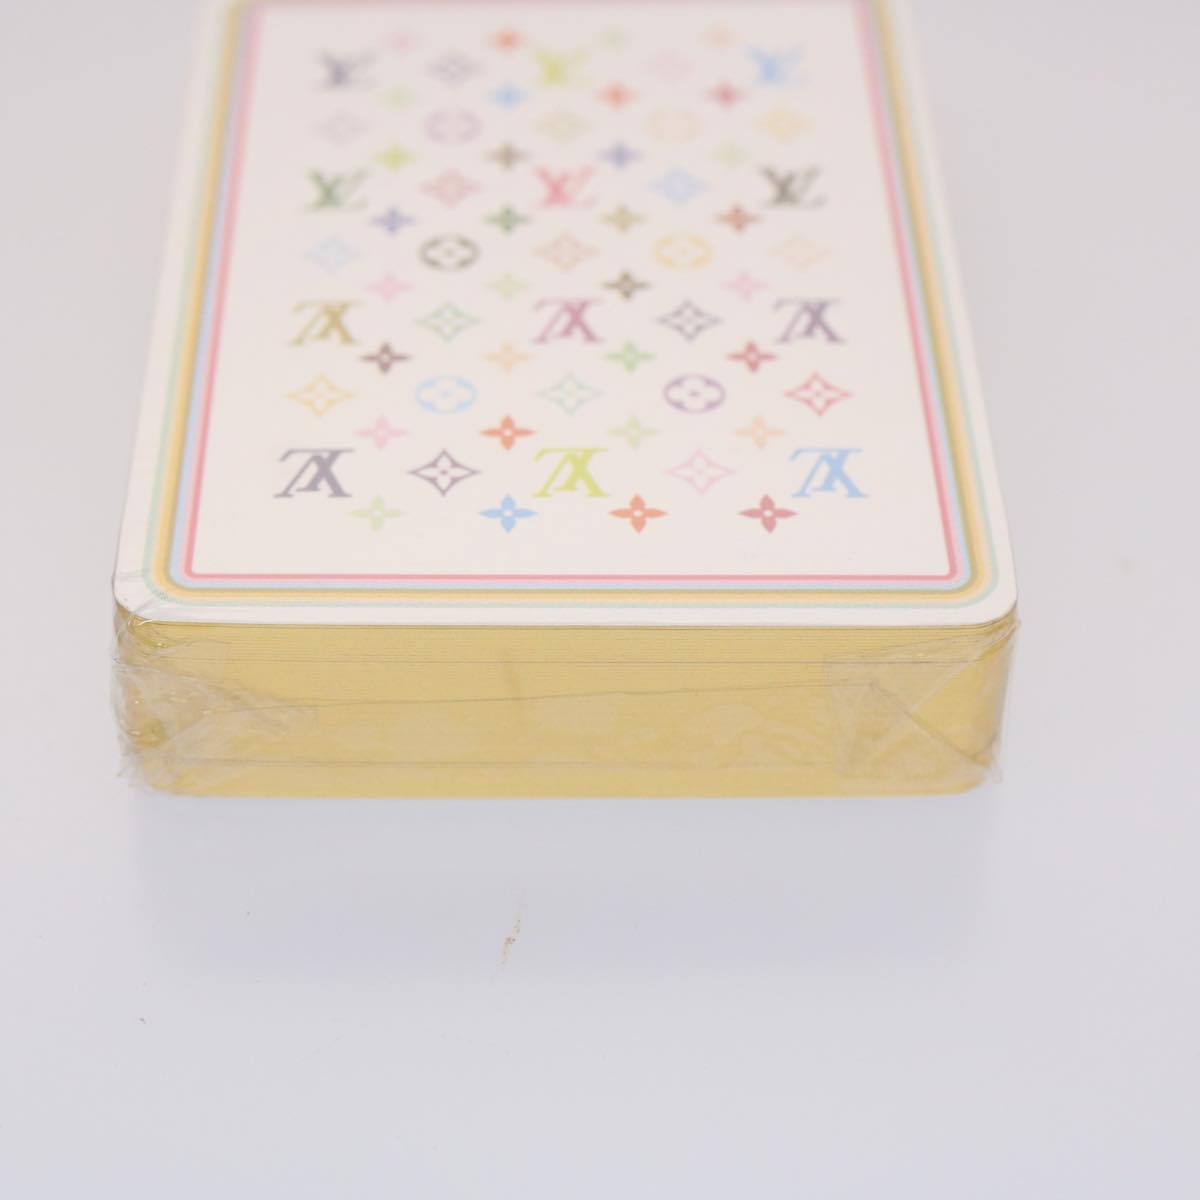 LOUIS VUITTON Playing Cards Multicolor LV Auth 45798A